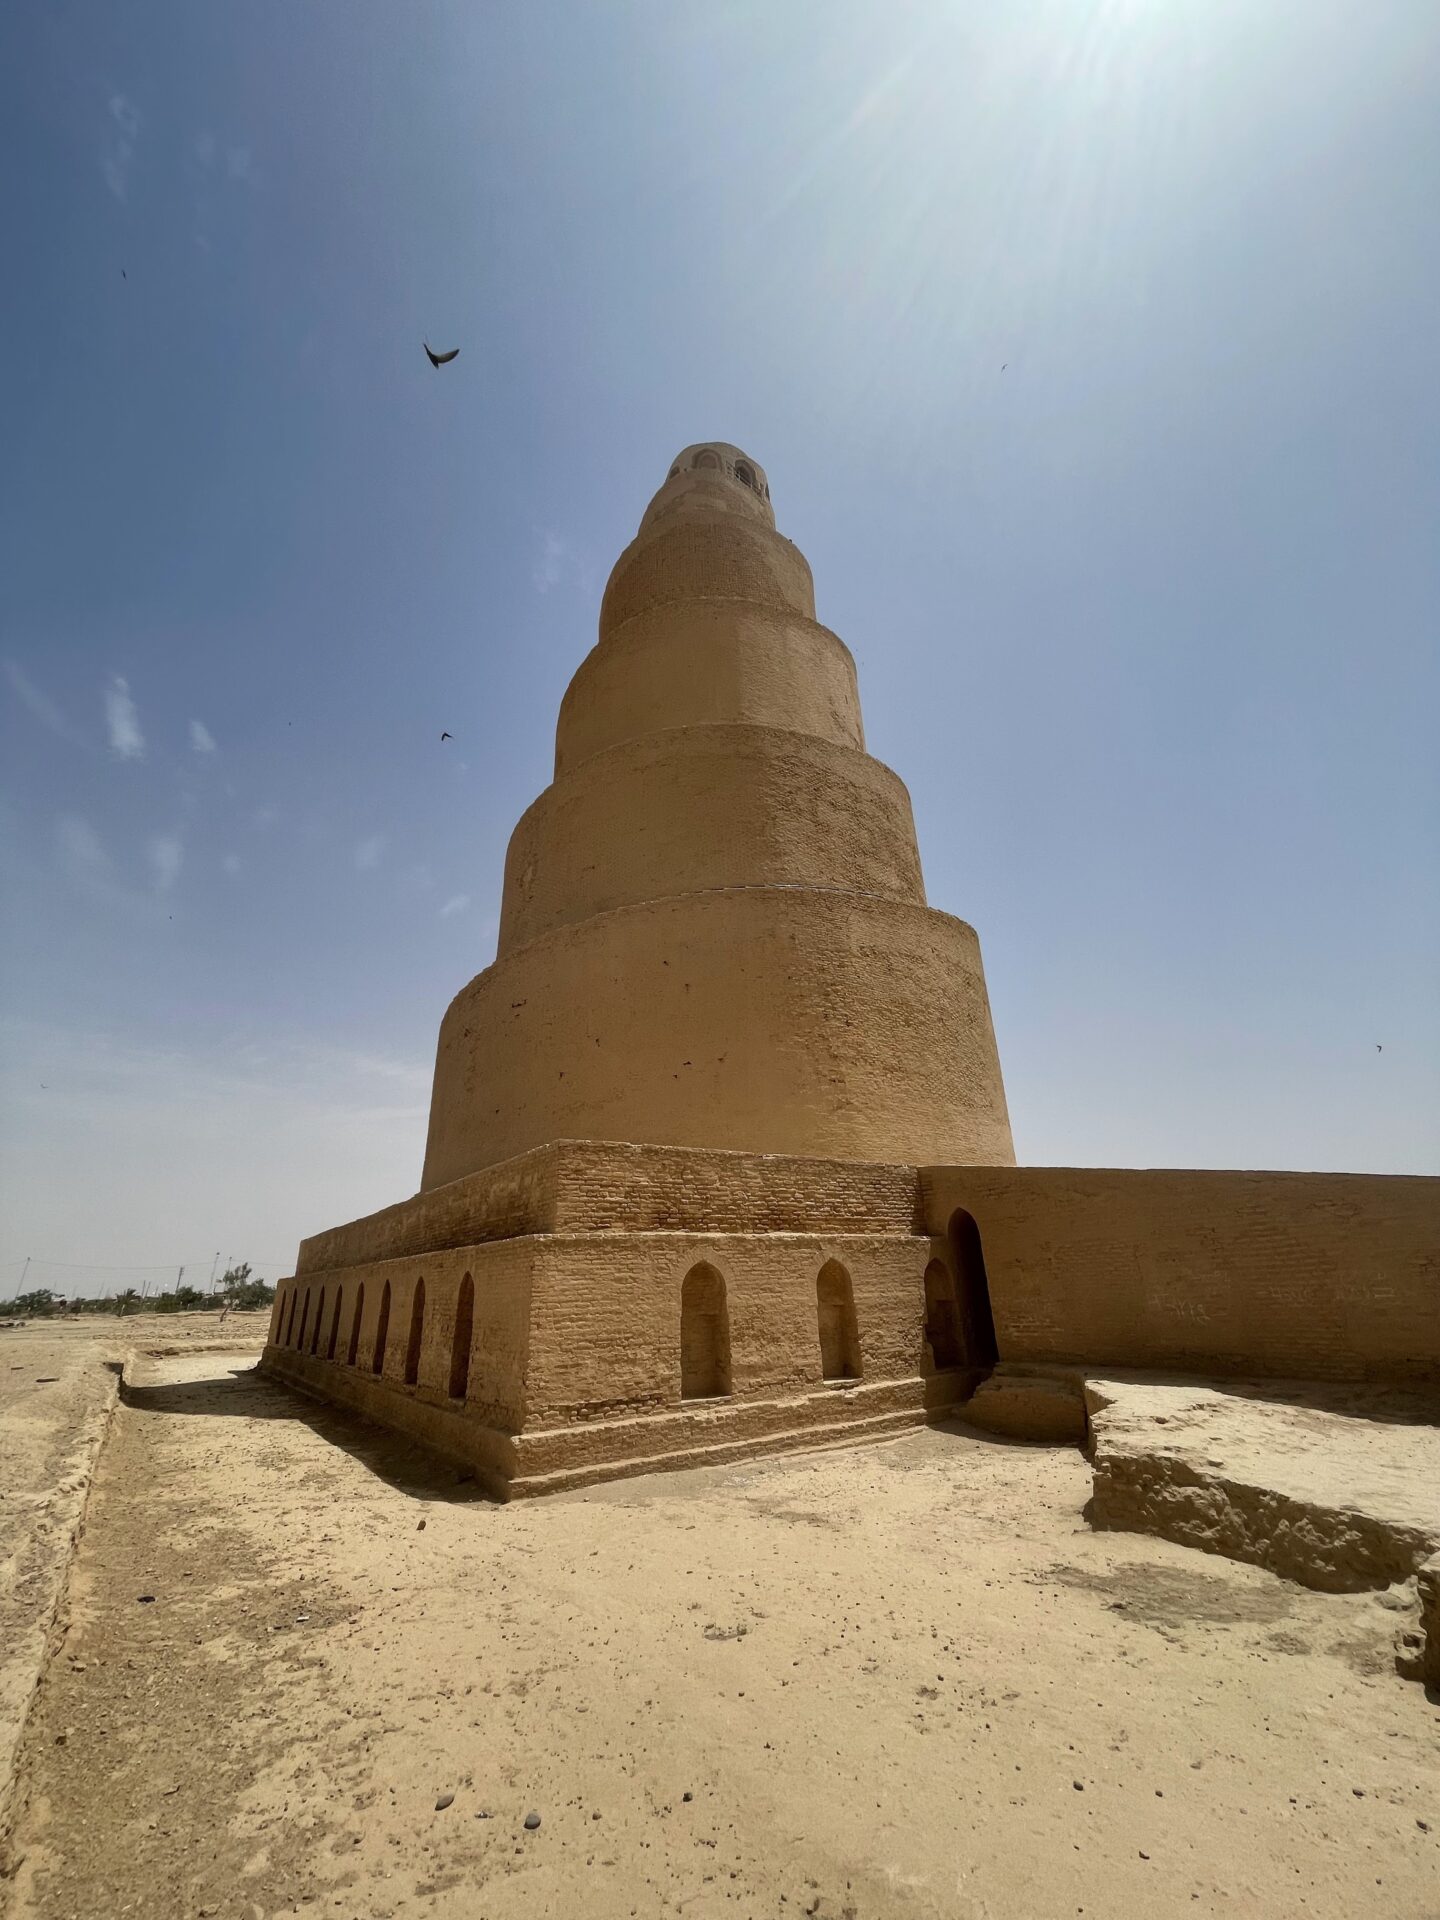 a large tower in a desert